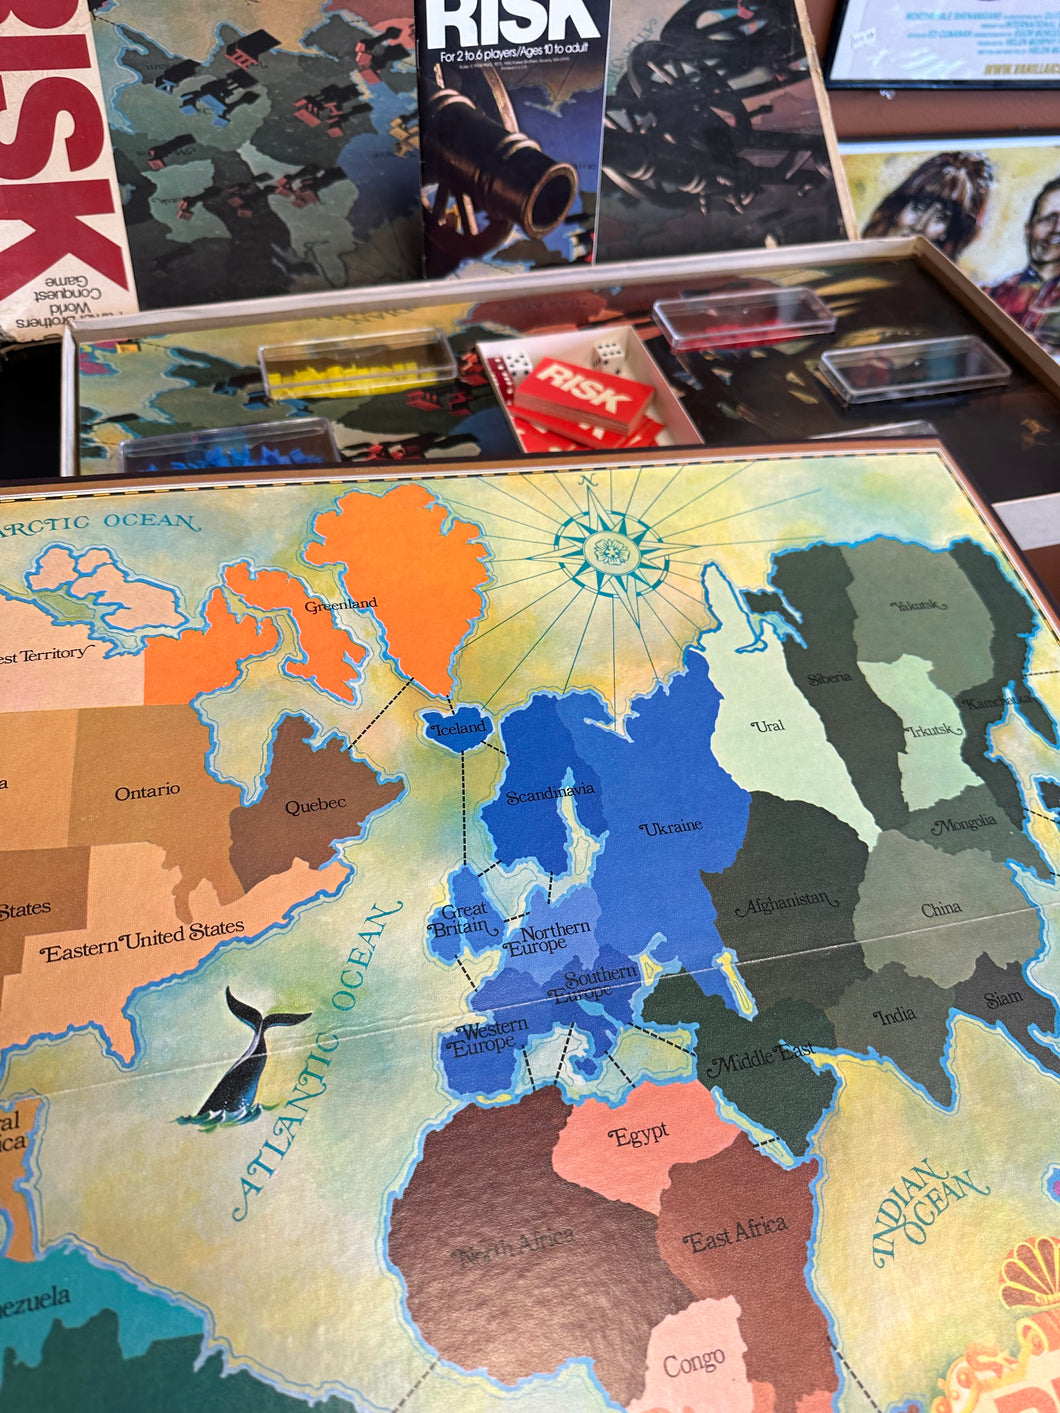 Parker Brothers 1980 RISK Game Preowned Incomplete